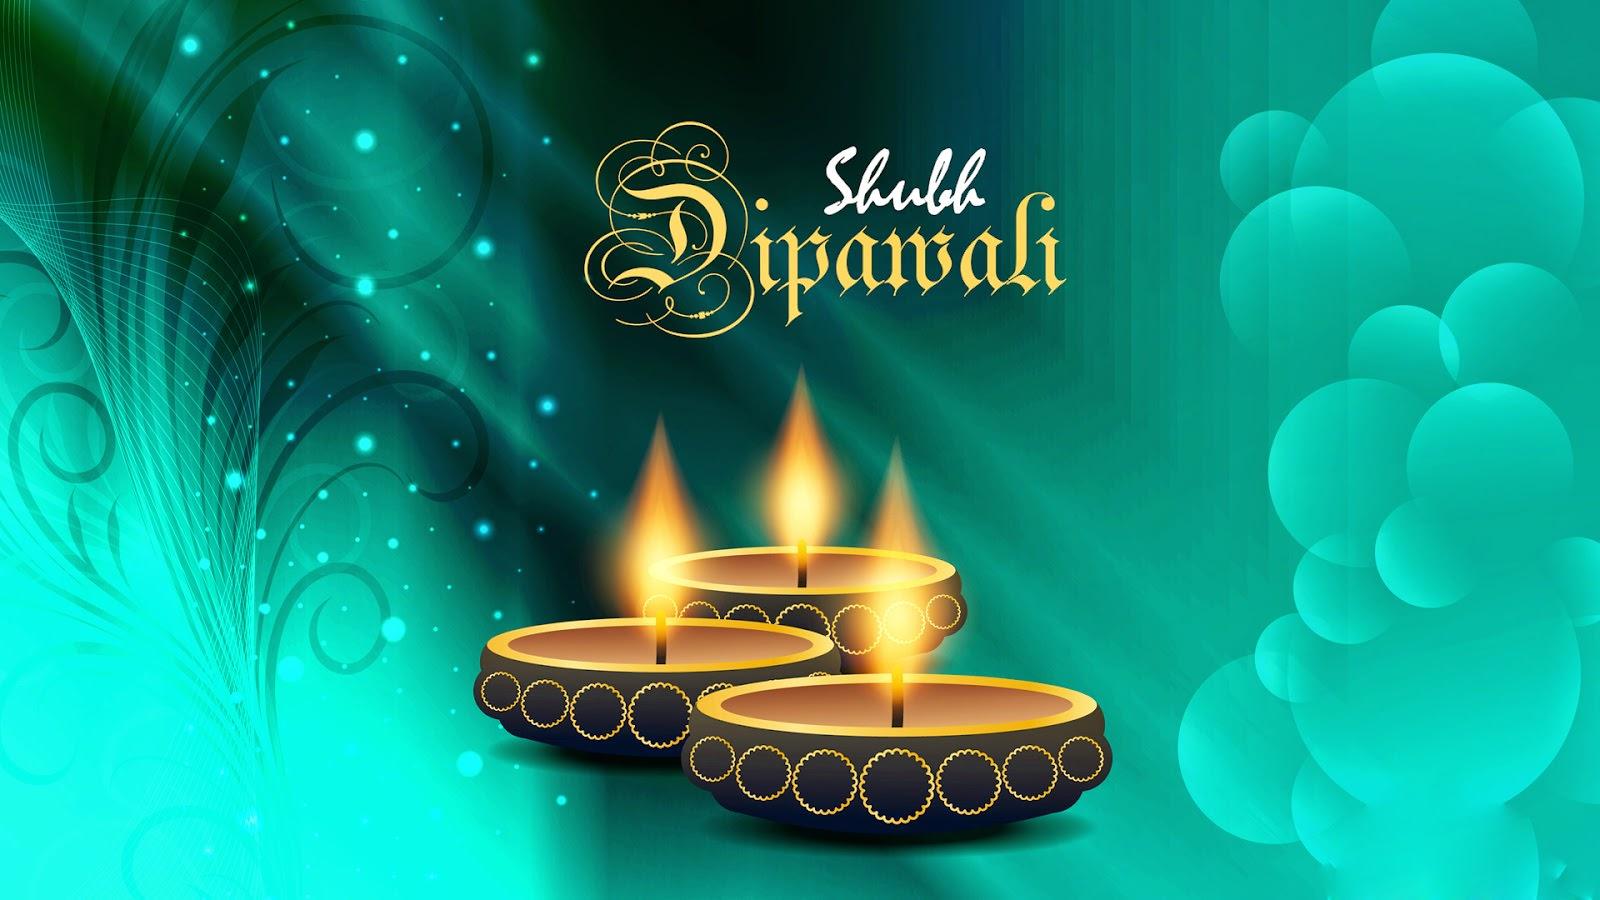 When Will the Festival of Light Fall. Happy Diwali 2020 Date